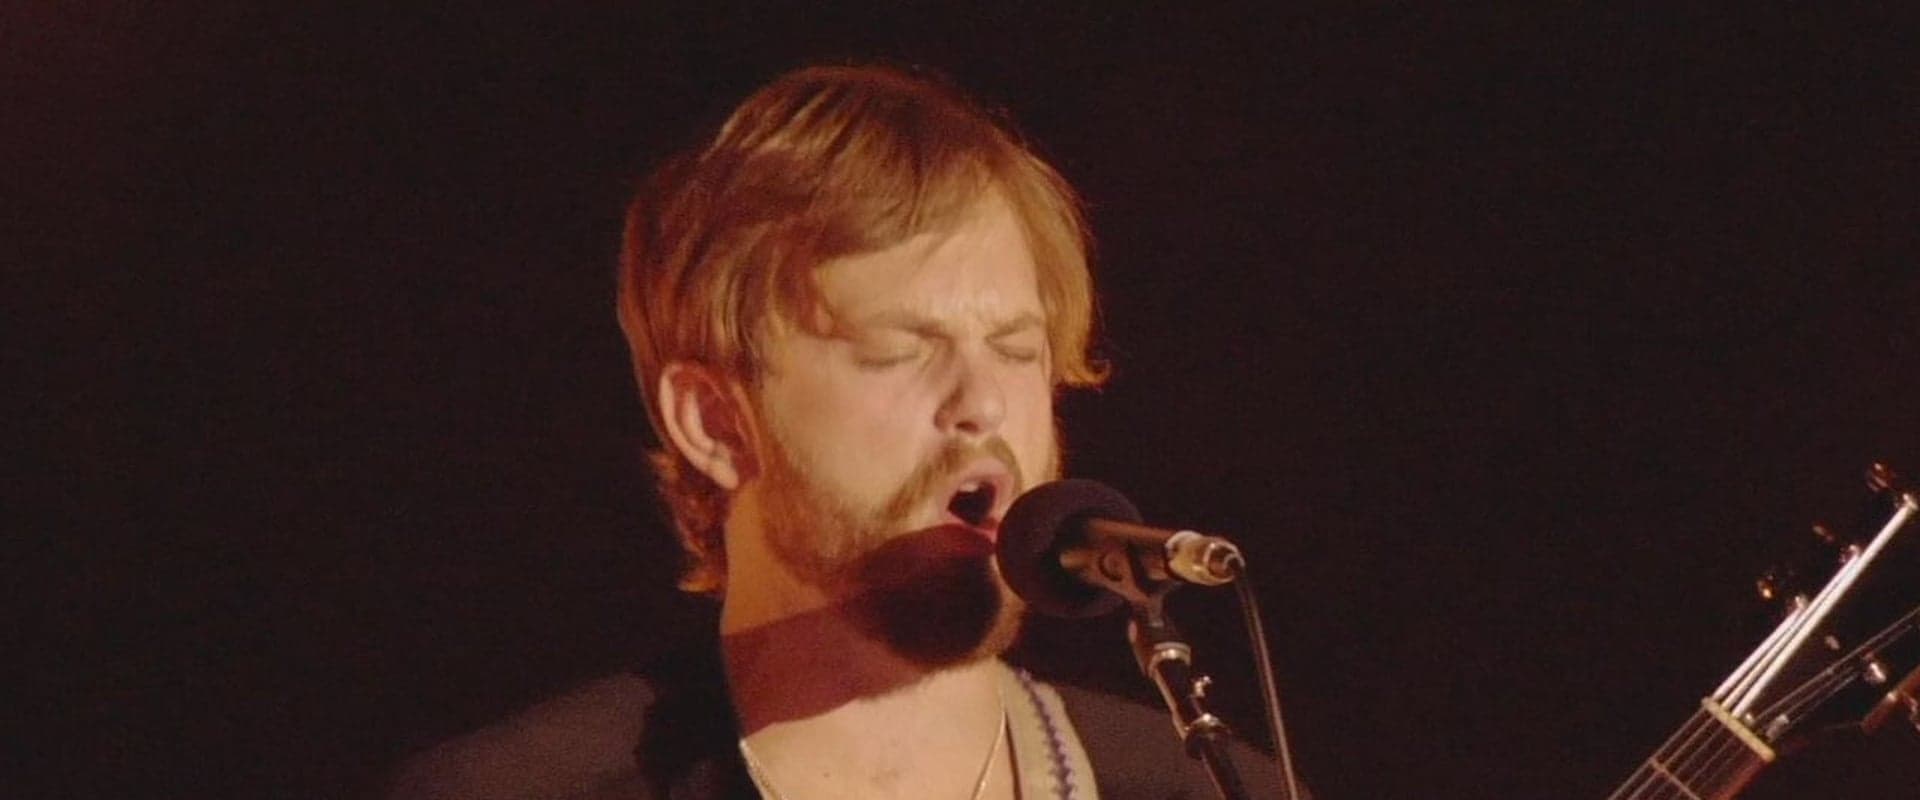 Kings of Leon: Live at The O2 London, England